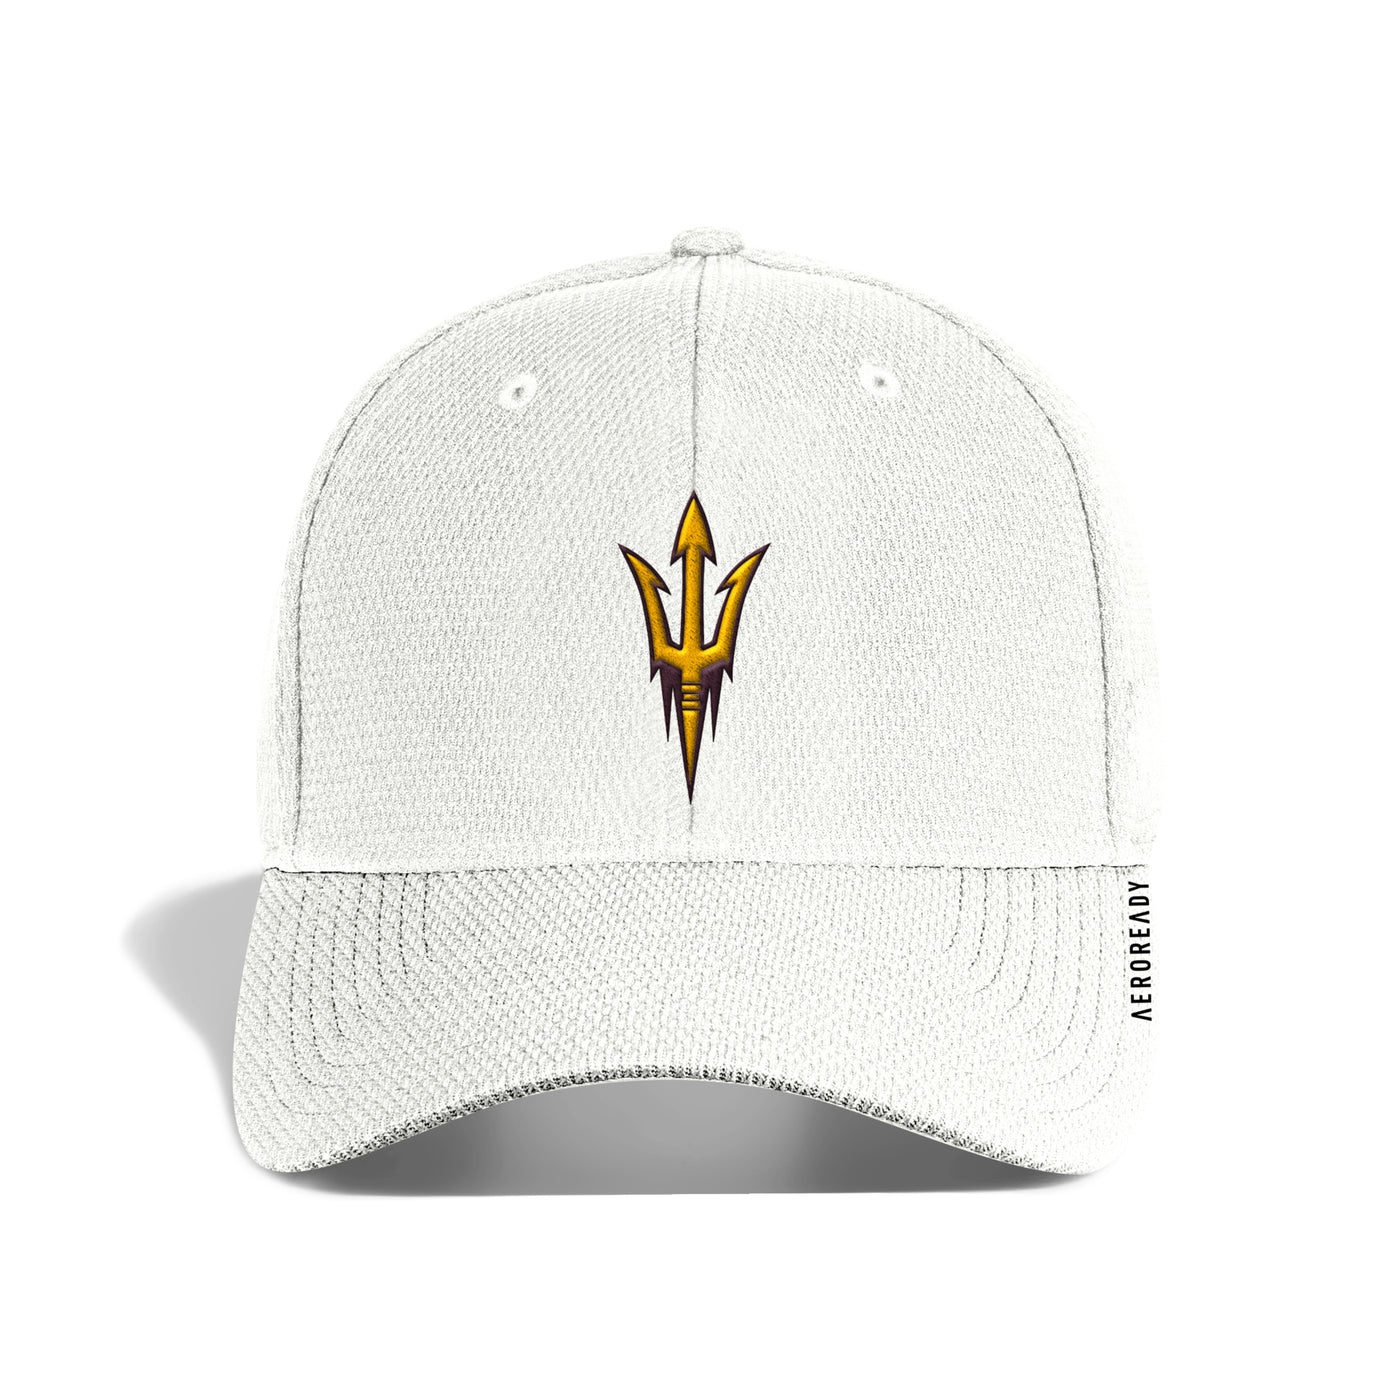 ASU white hat with curved bill and a pitchfork logo on front panel.